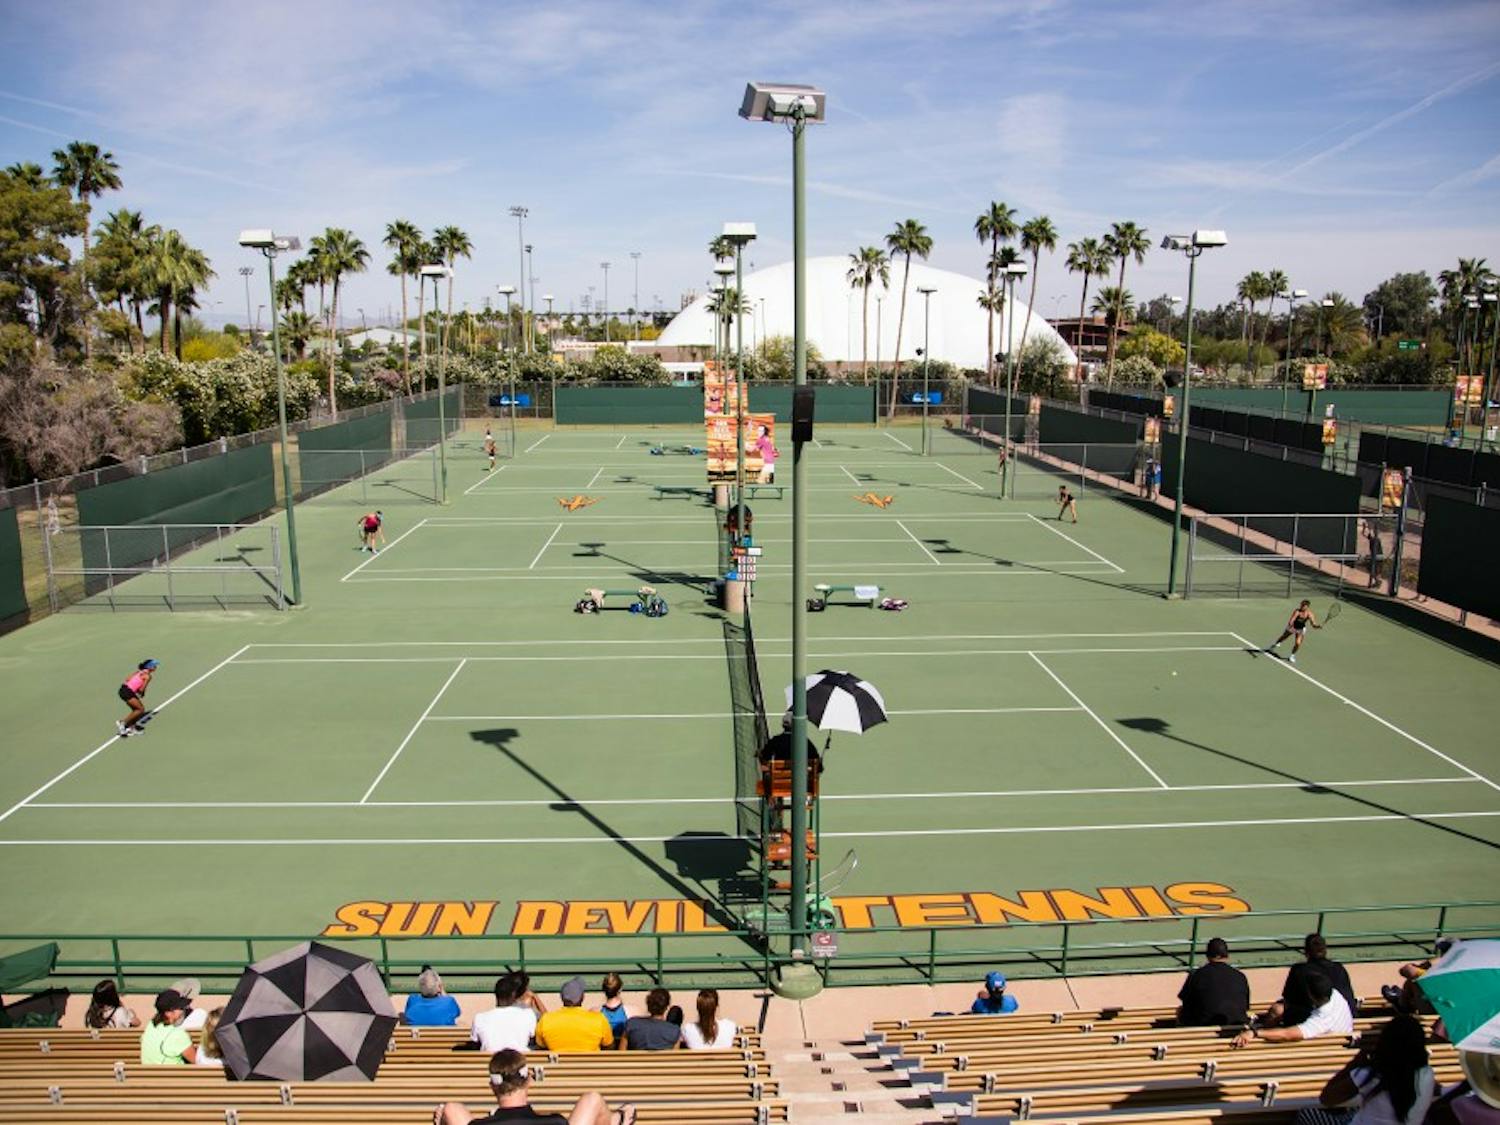 The Sun Devil women's tennis team squares of against UCLA at the Whiteman Tennis Center on April 3rd, 2015. The Sun Devils would lose to the Bruins 3-4.